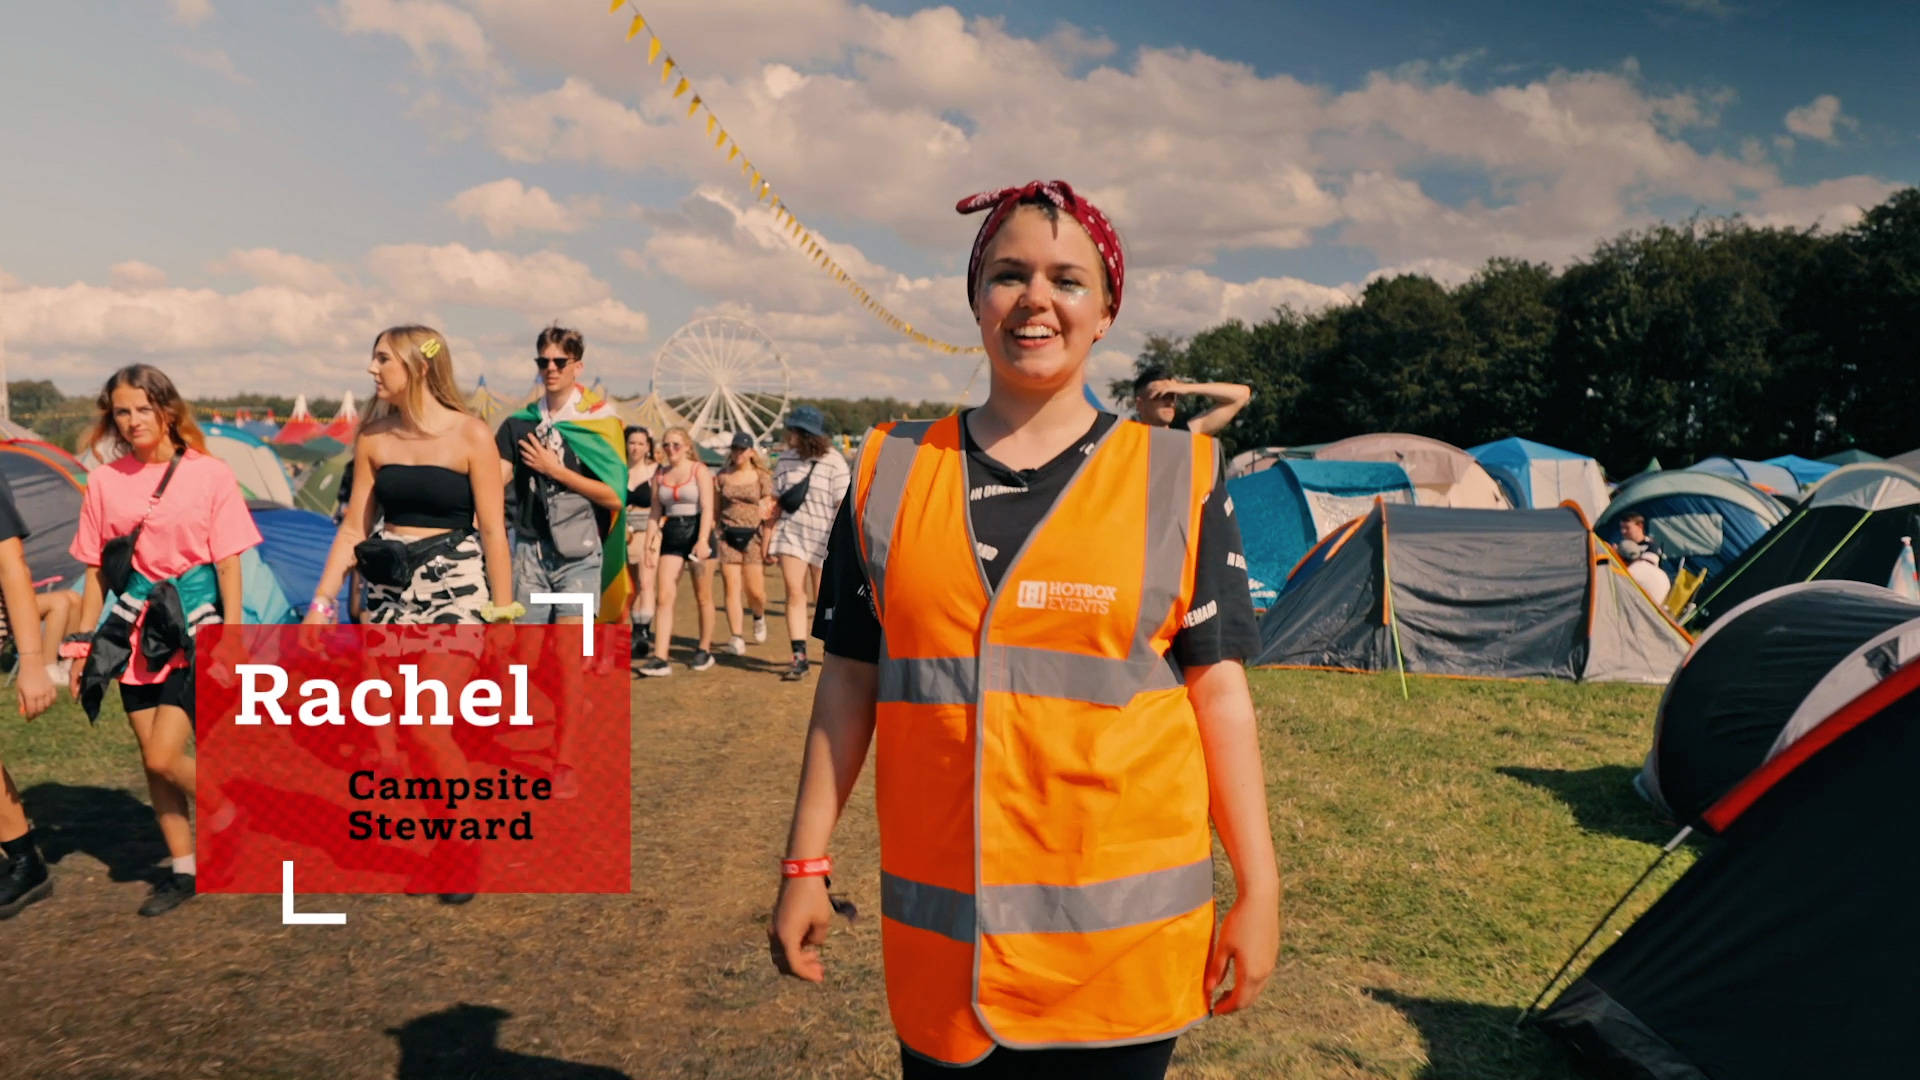 Rachel a Campsite Steward volunteering with Hotbox Events at Leeds Festival!